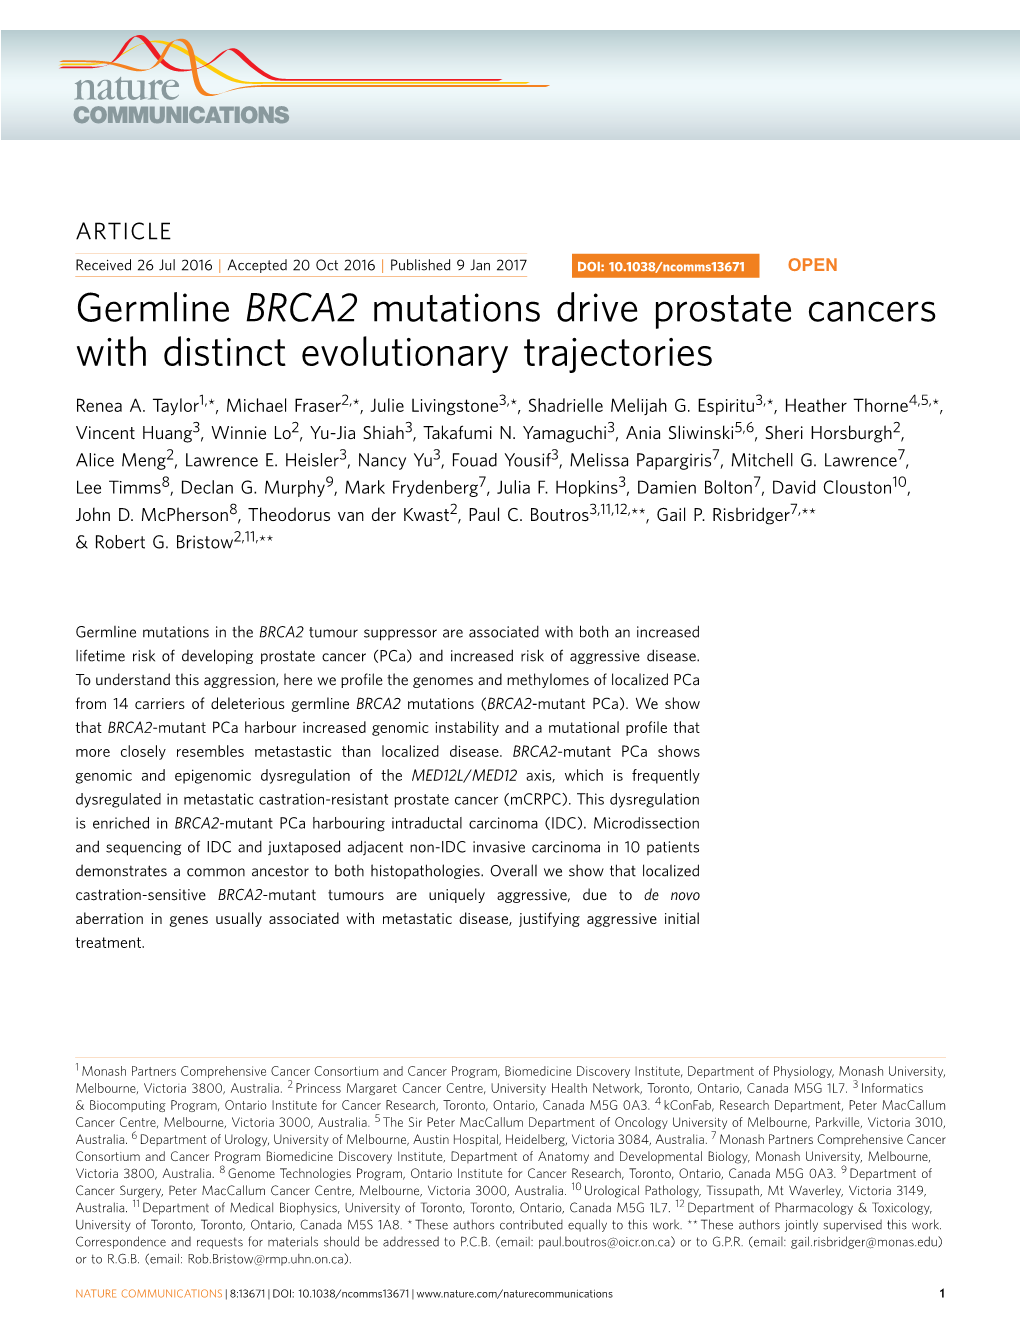 Germline BRCA2 Mutations Drive Prostate Cancers with Distinct Evolutionary Trajectories